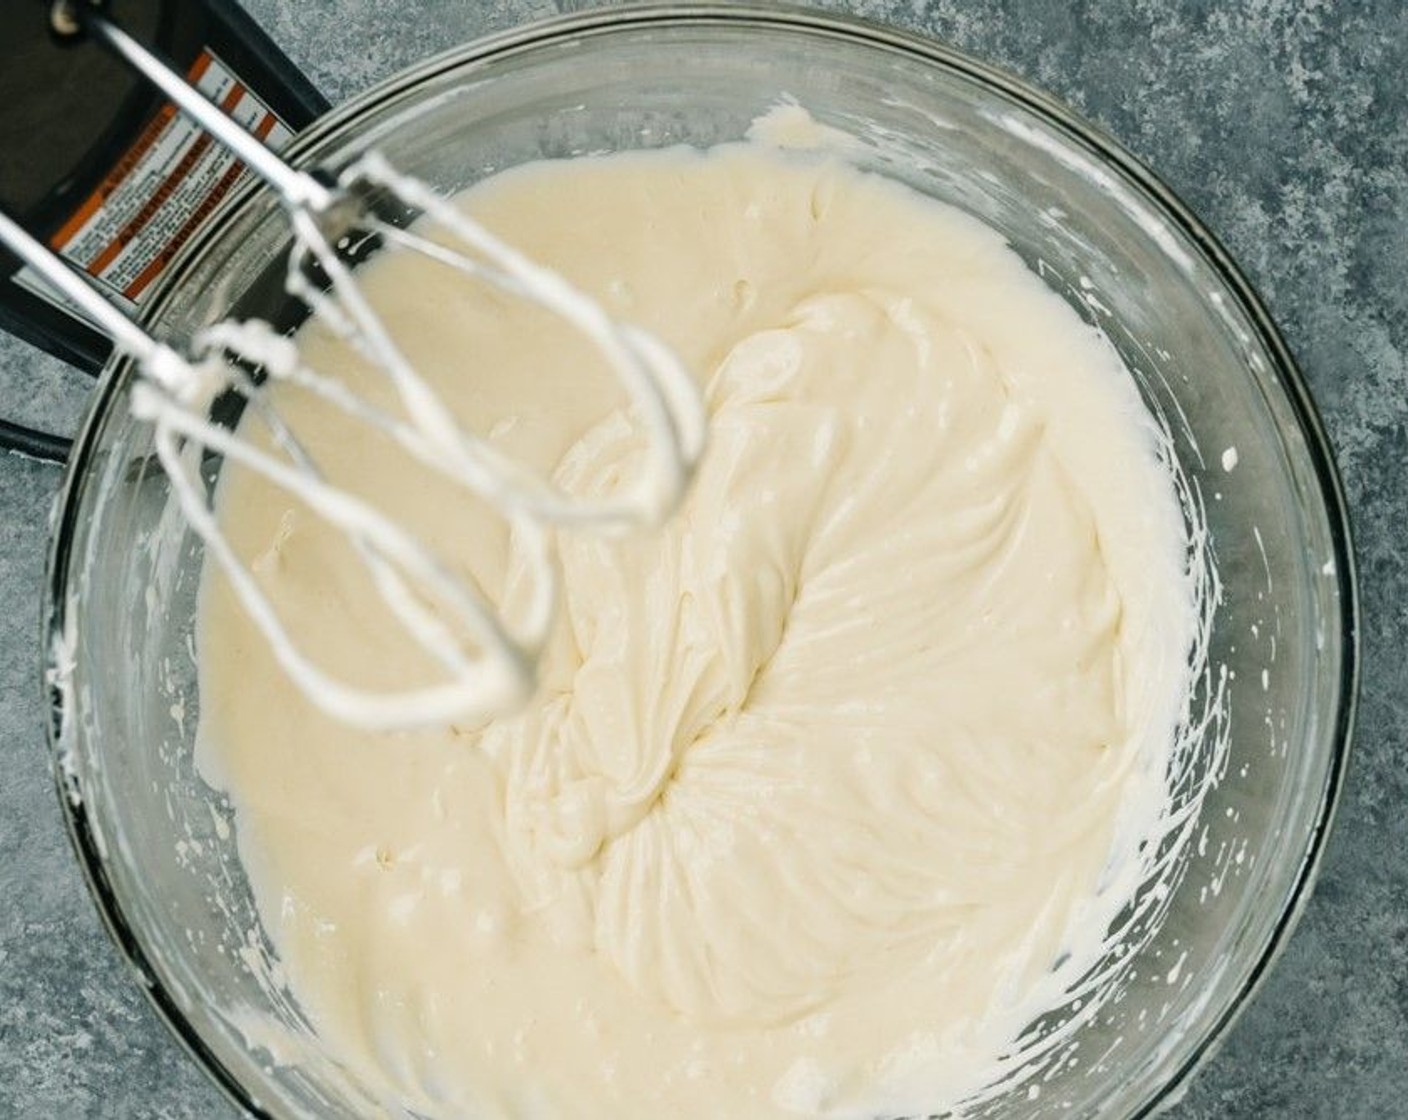 step 6 Add Philadelphia Original Soft Cheese (2 pckg), Granulated Sugar (3/4 cup), Vanilla Extract (1 tsp), and juice from Lemon (1) to a large mixing bowl and use an electric mixer to beat the cream cheese and sugar together until smooth. Scrapes the sides of the bowl as needed.